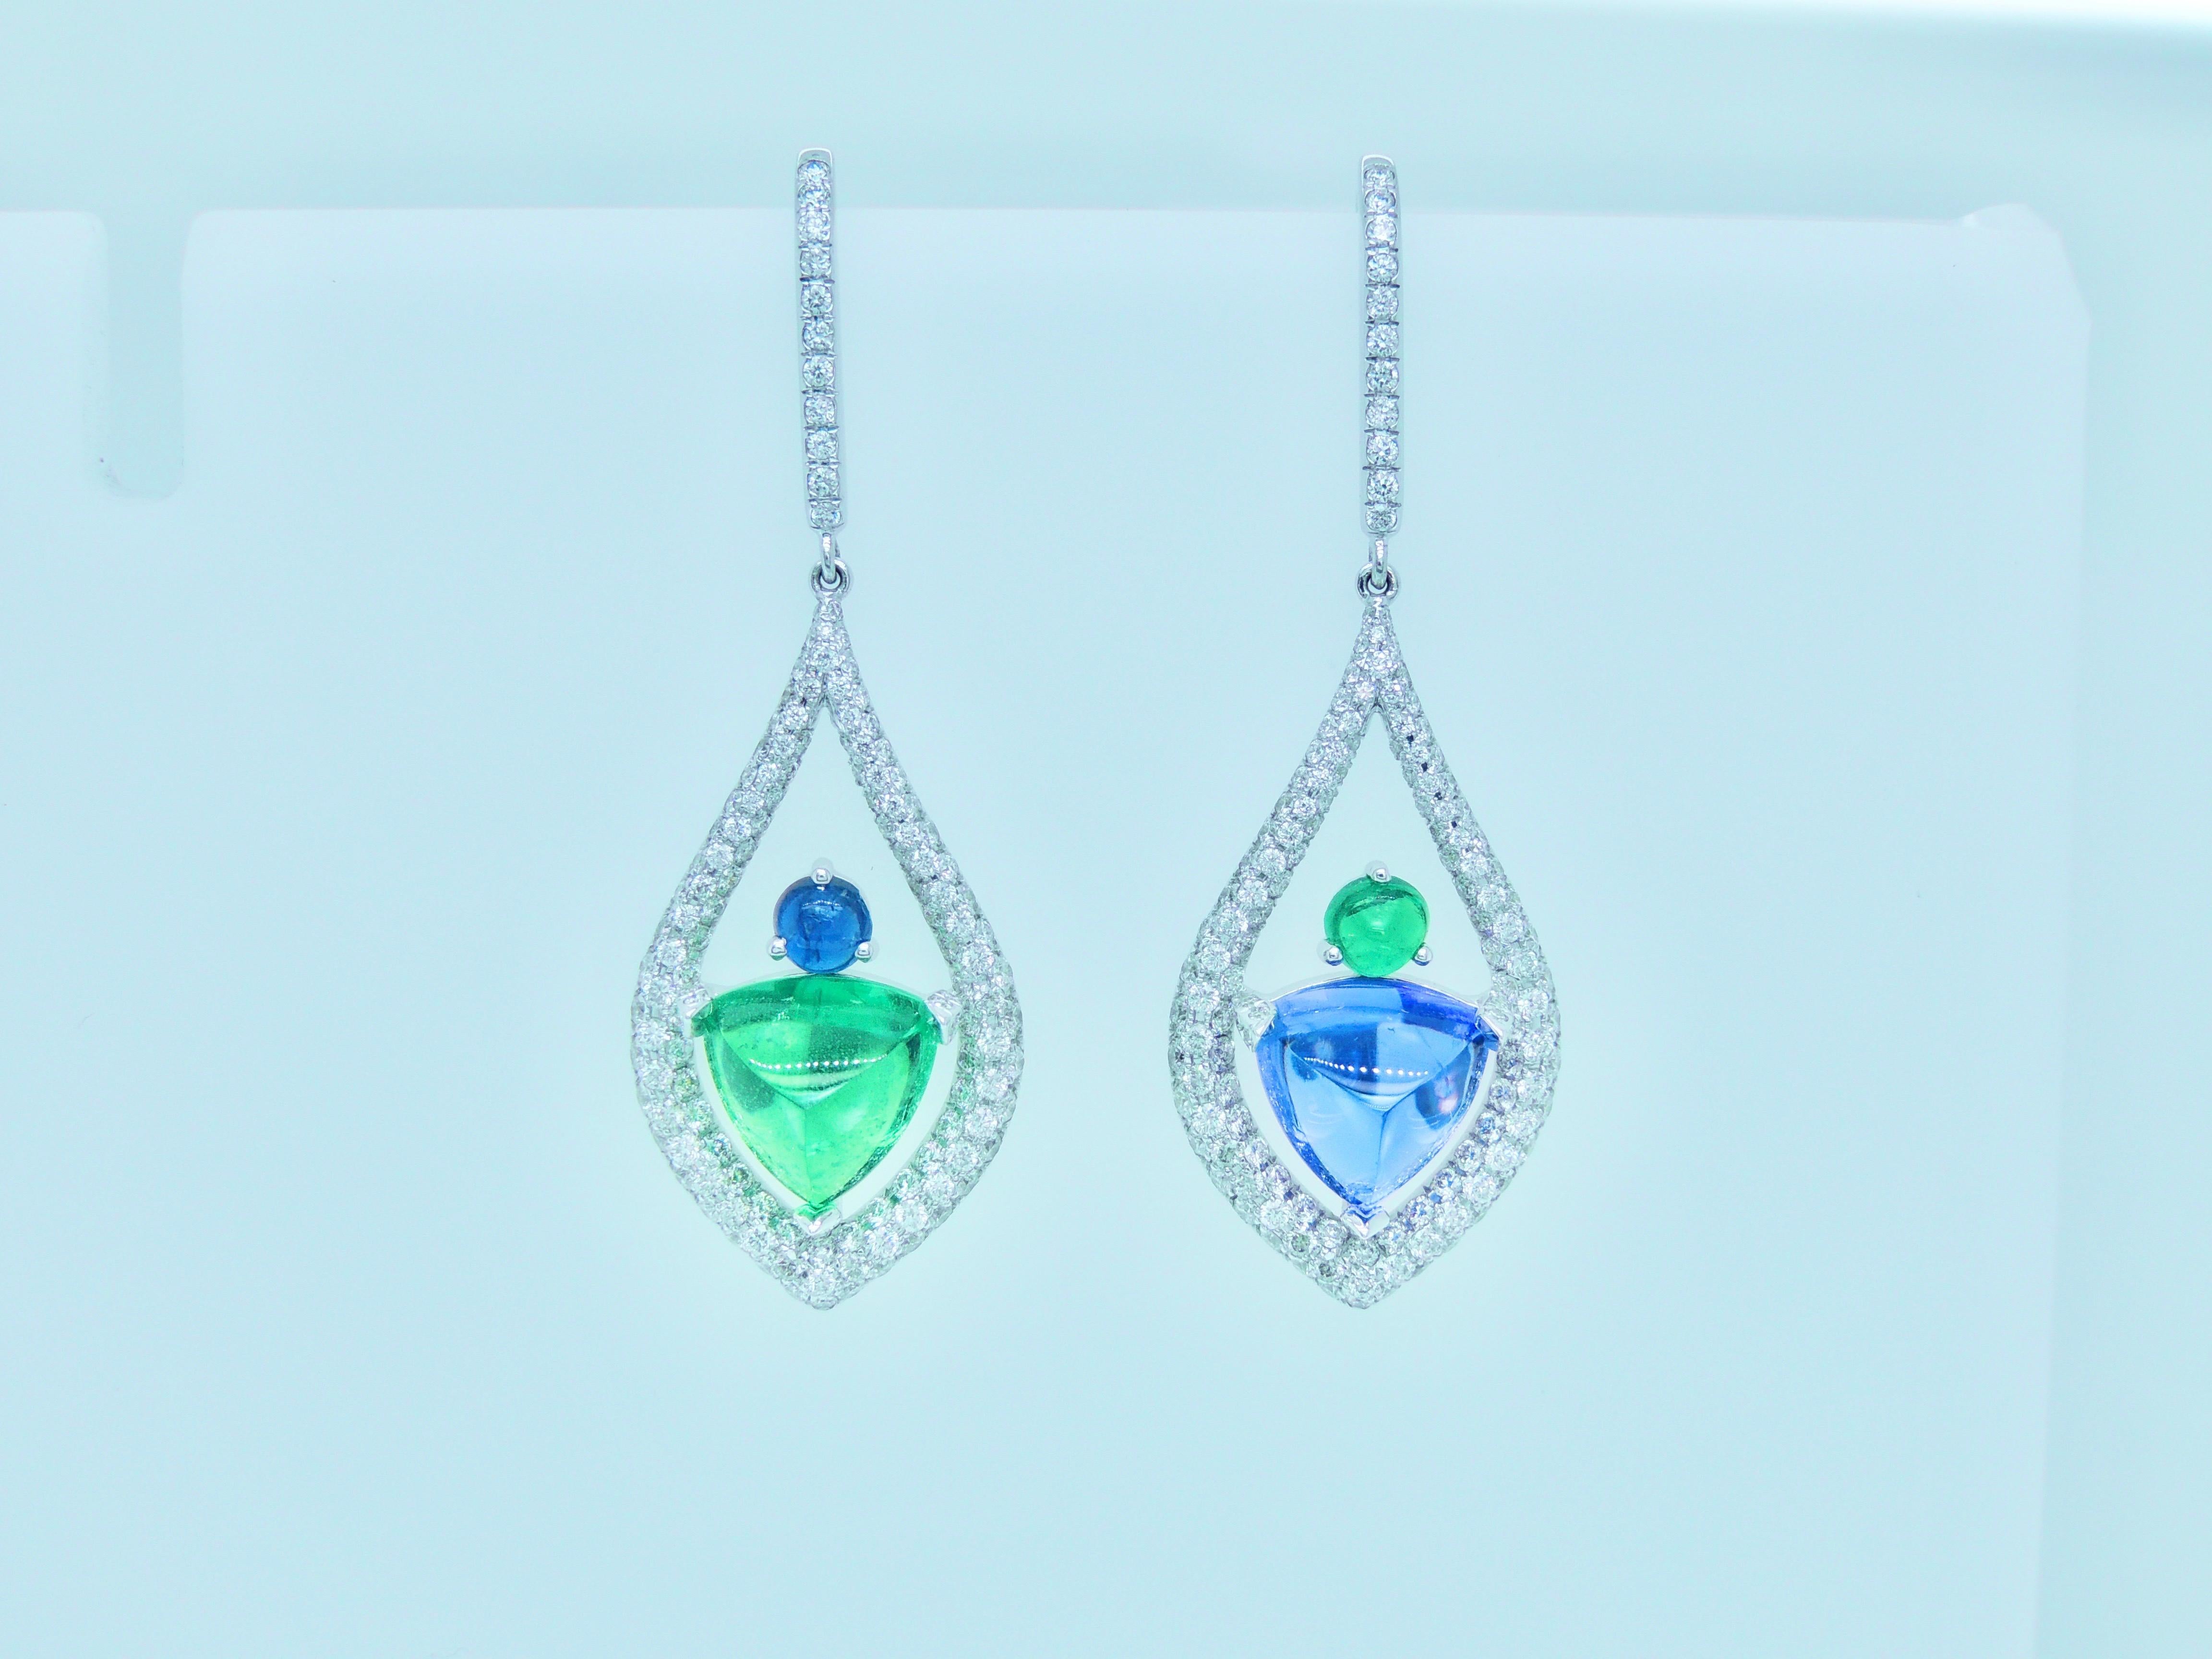 Beautiful mismatch drop earrings with triangular tsavorite and tanzanite cabochons, round emerald and sapphire cabochons and diamond micropavé.

•	Total Diamond Weight: 1.19 carats
•	Tsavorite Weight: 2.64 carats
•	Tanzanite Weight: 2.34